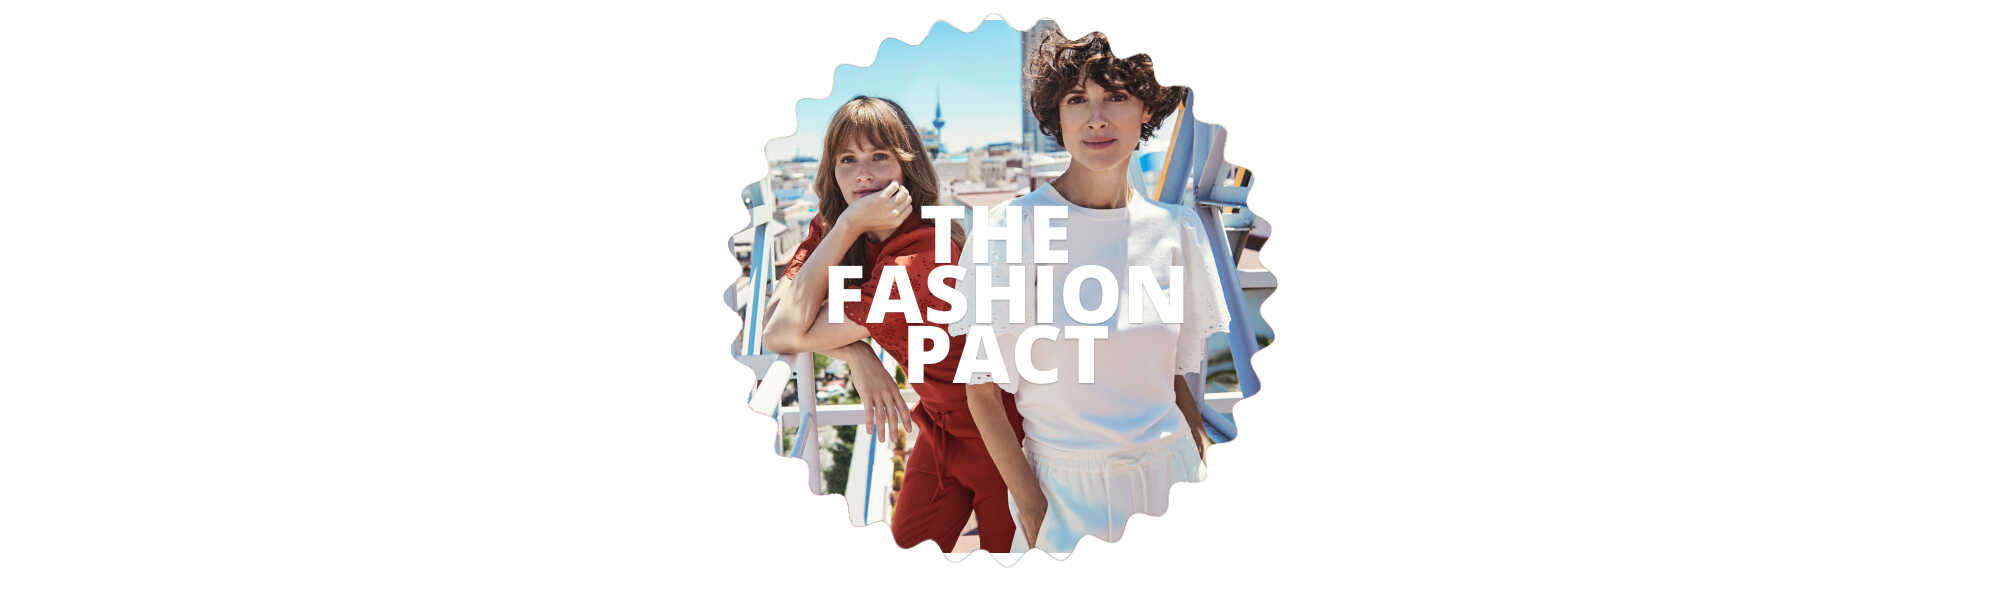 THE FASHION PACT